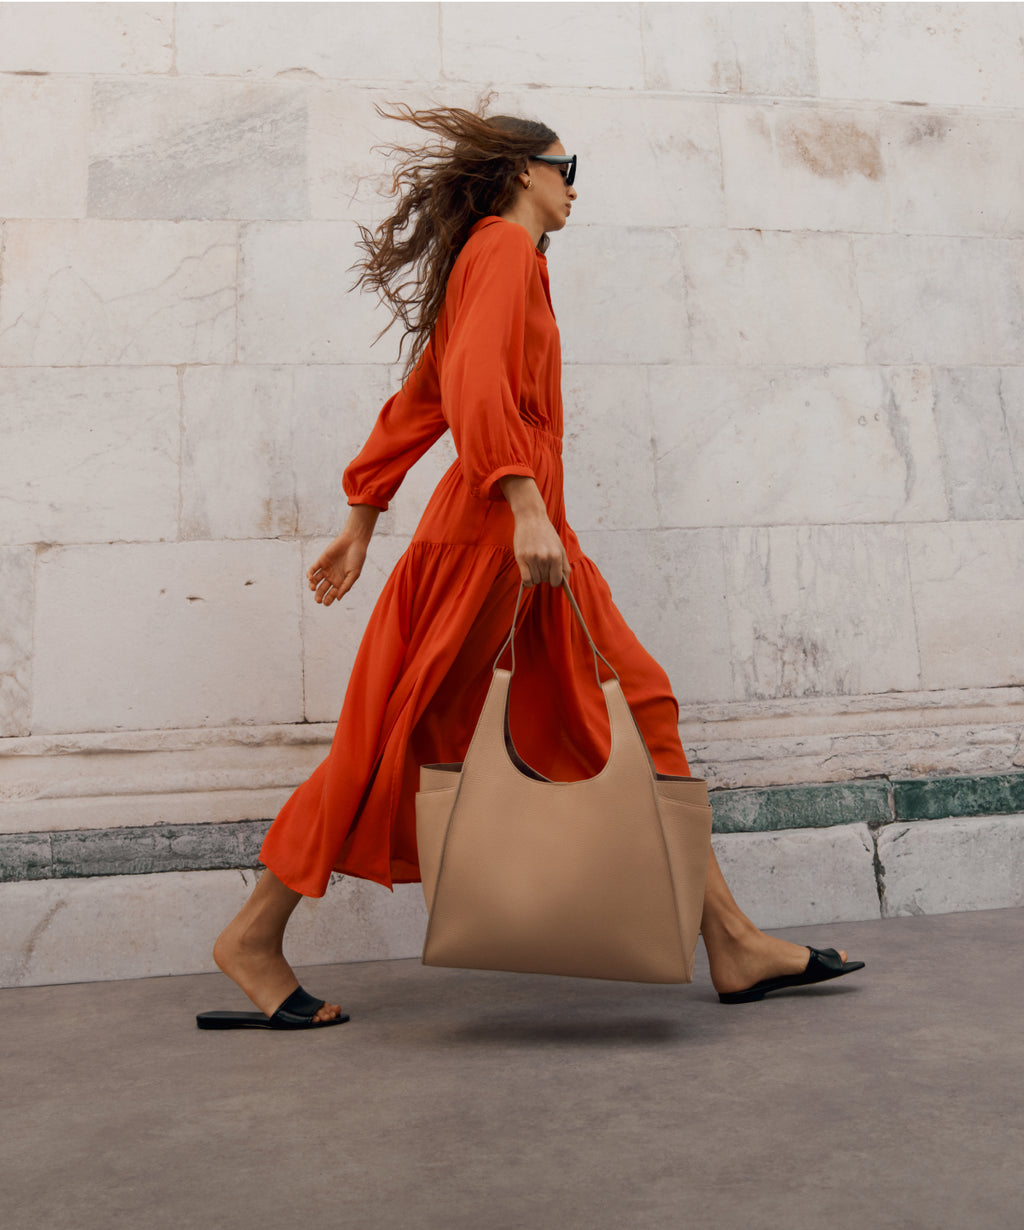 Linked Image: Directs to Summer Collection preview. Image Description: Model wearing Cuyana Tencel Verano Dress in color Tangerine and carrying the Cuyana Double Loop Satchel in color Cappuccino.